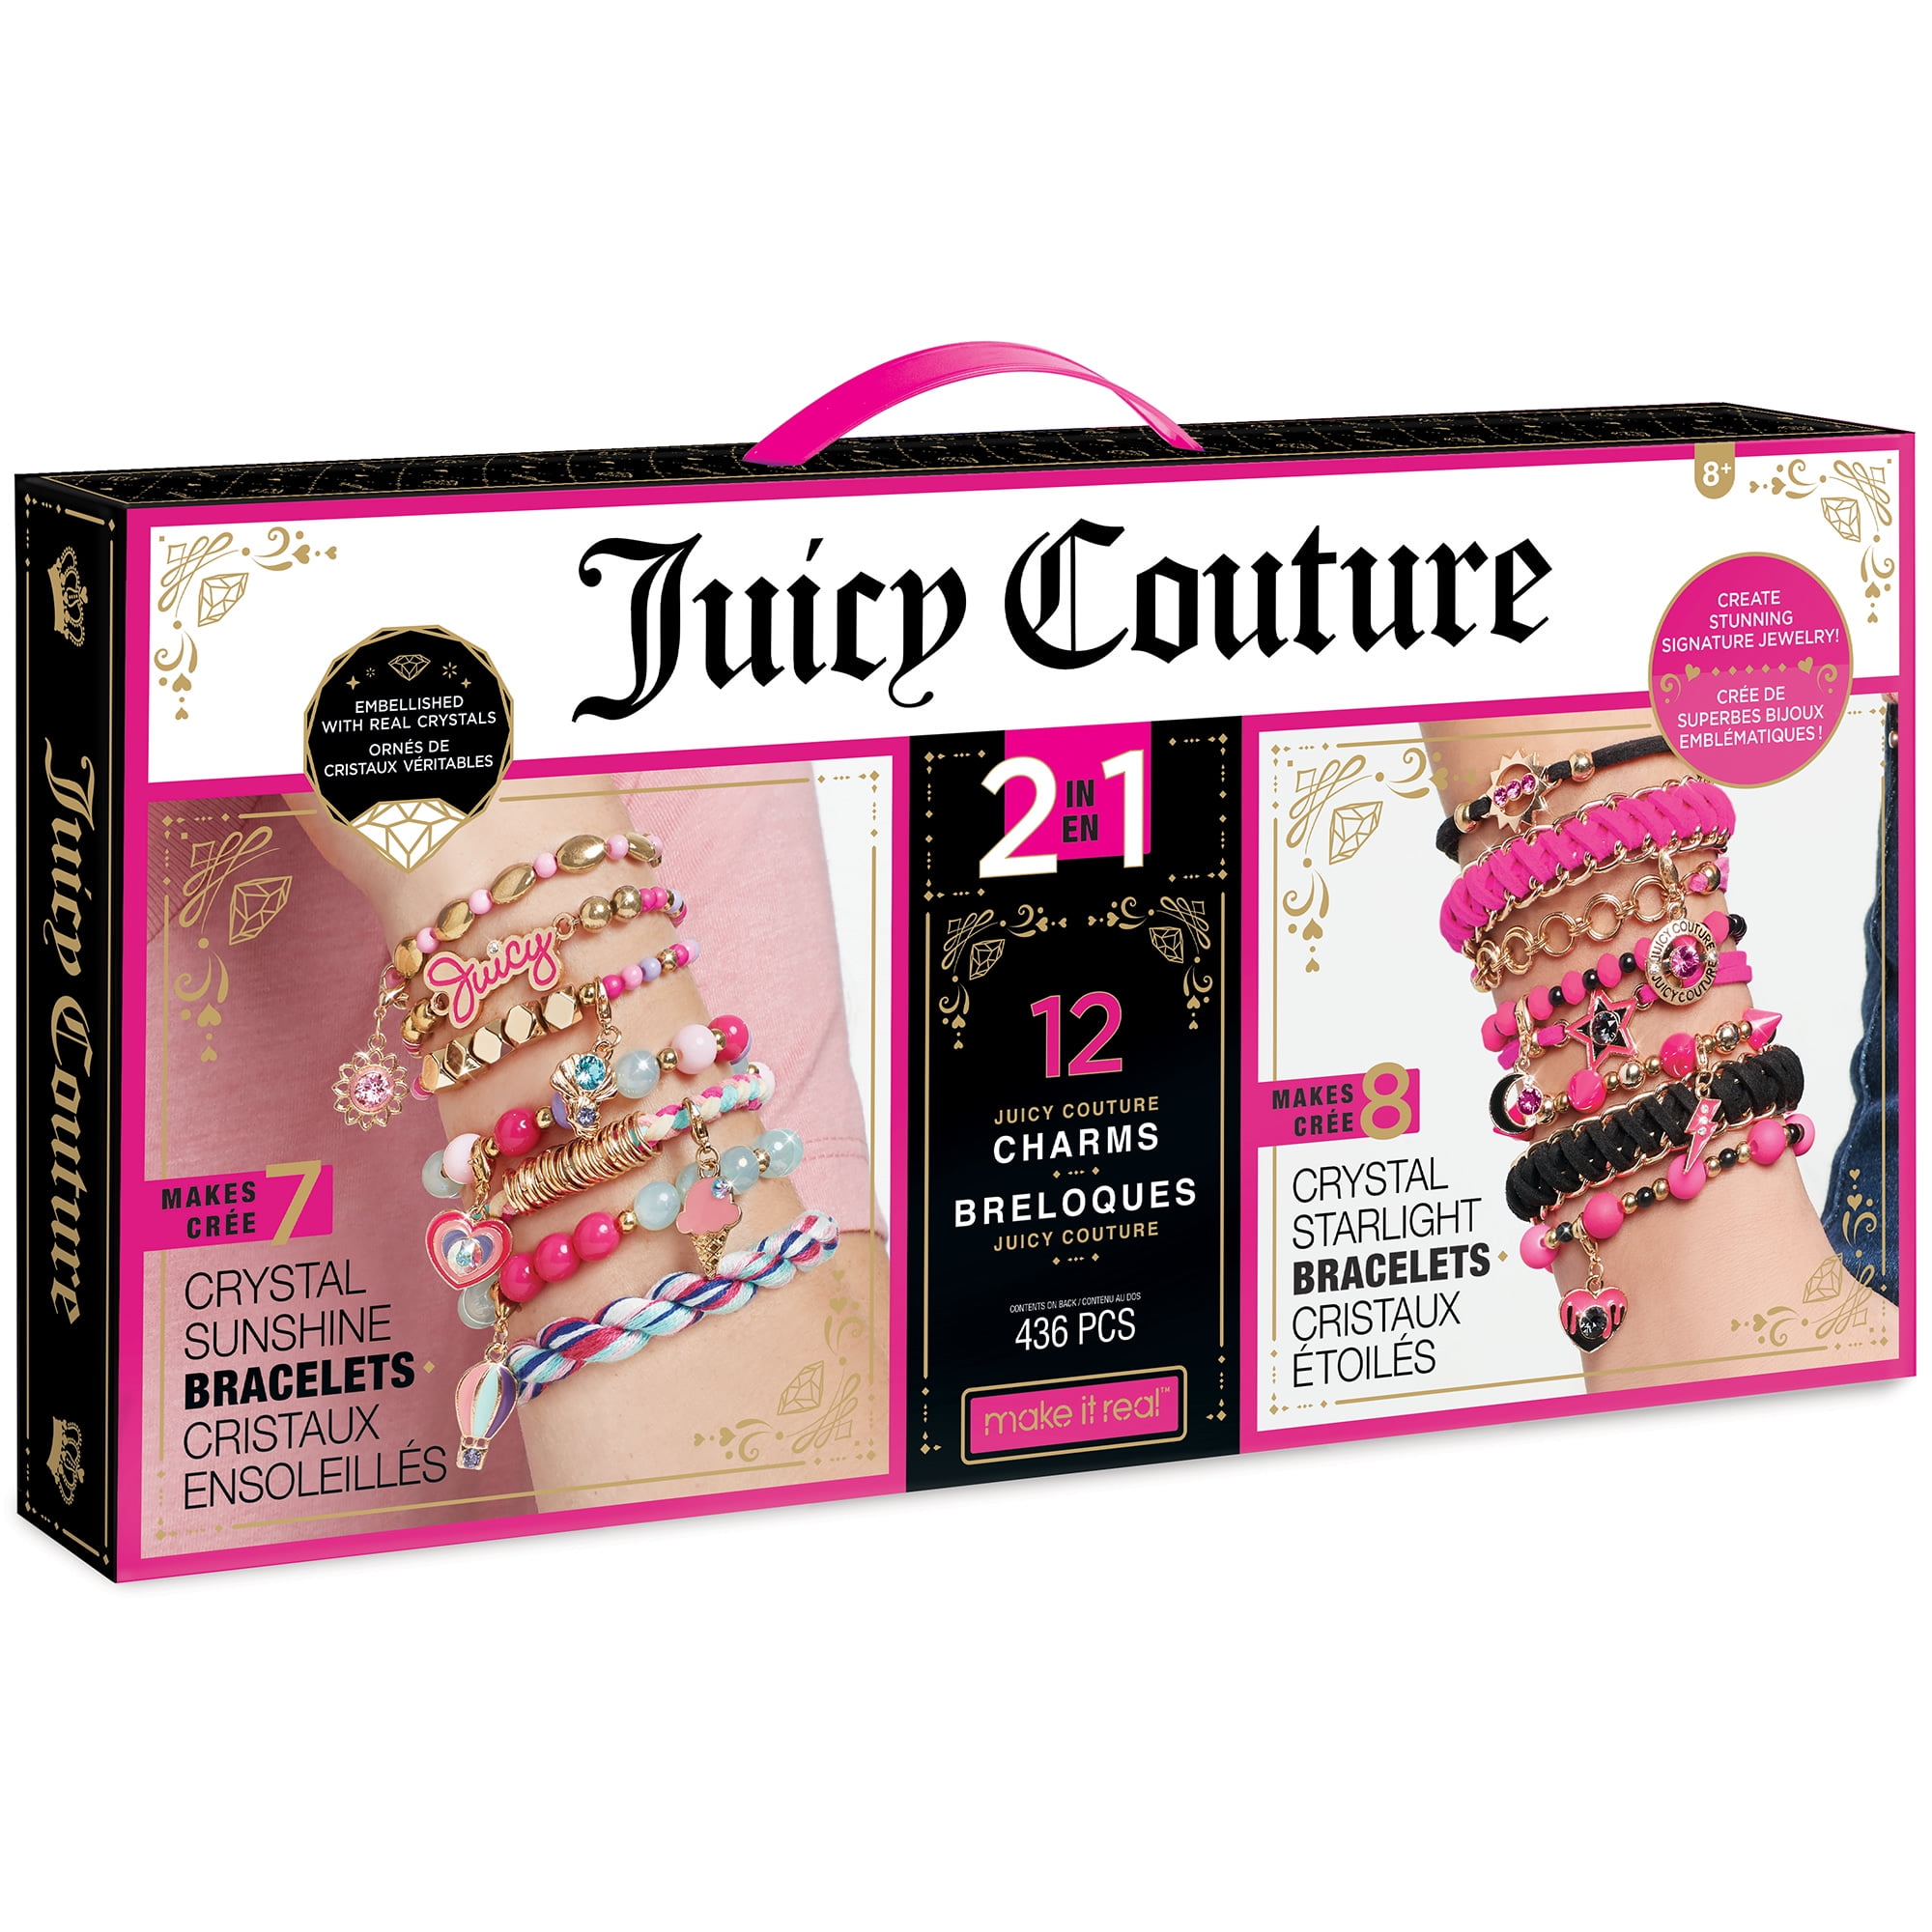 Juicy Couture: 2-in-1 Crystal Sunshine & Starlight DIY Bracelets